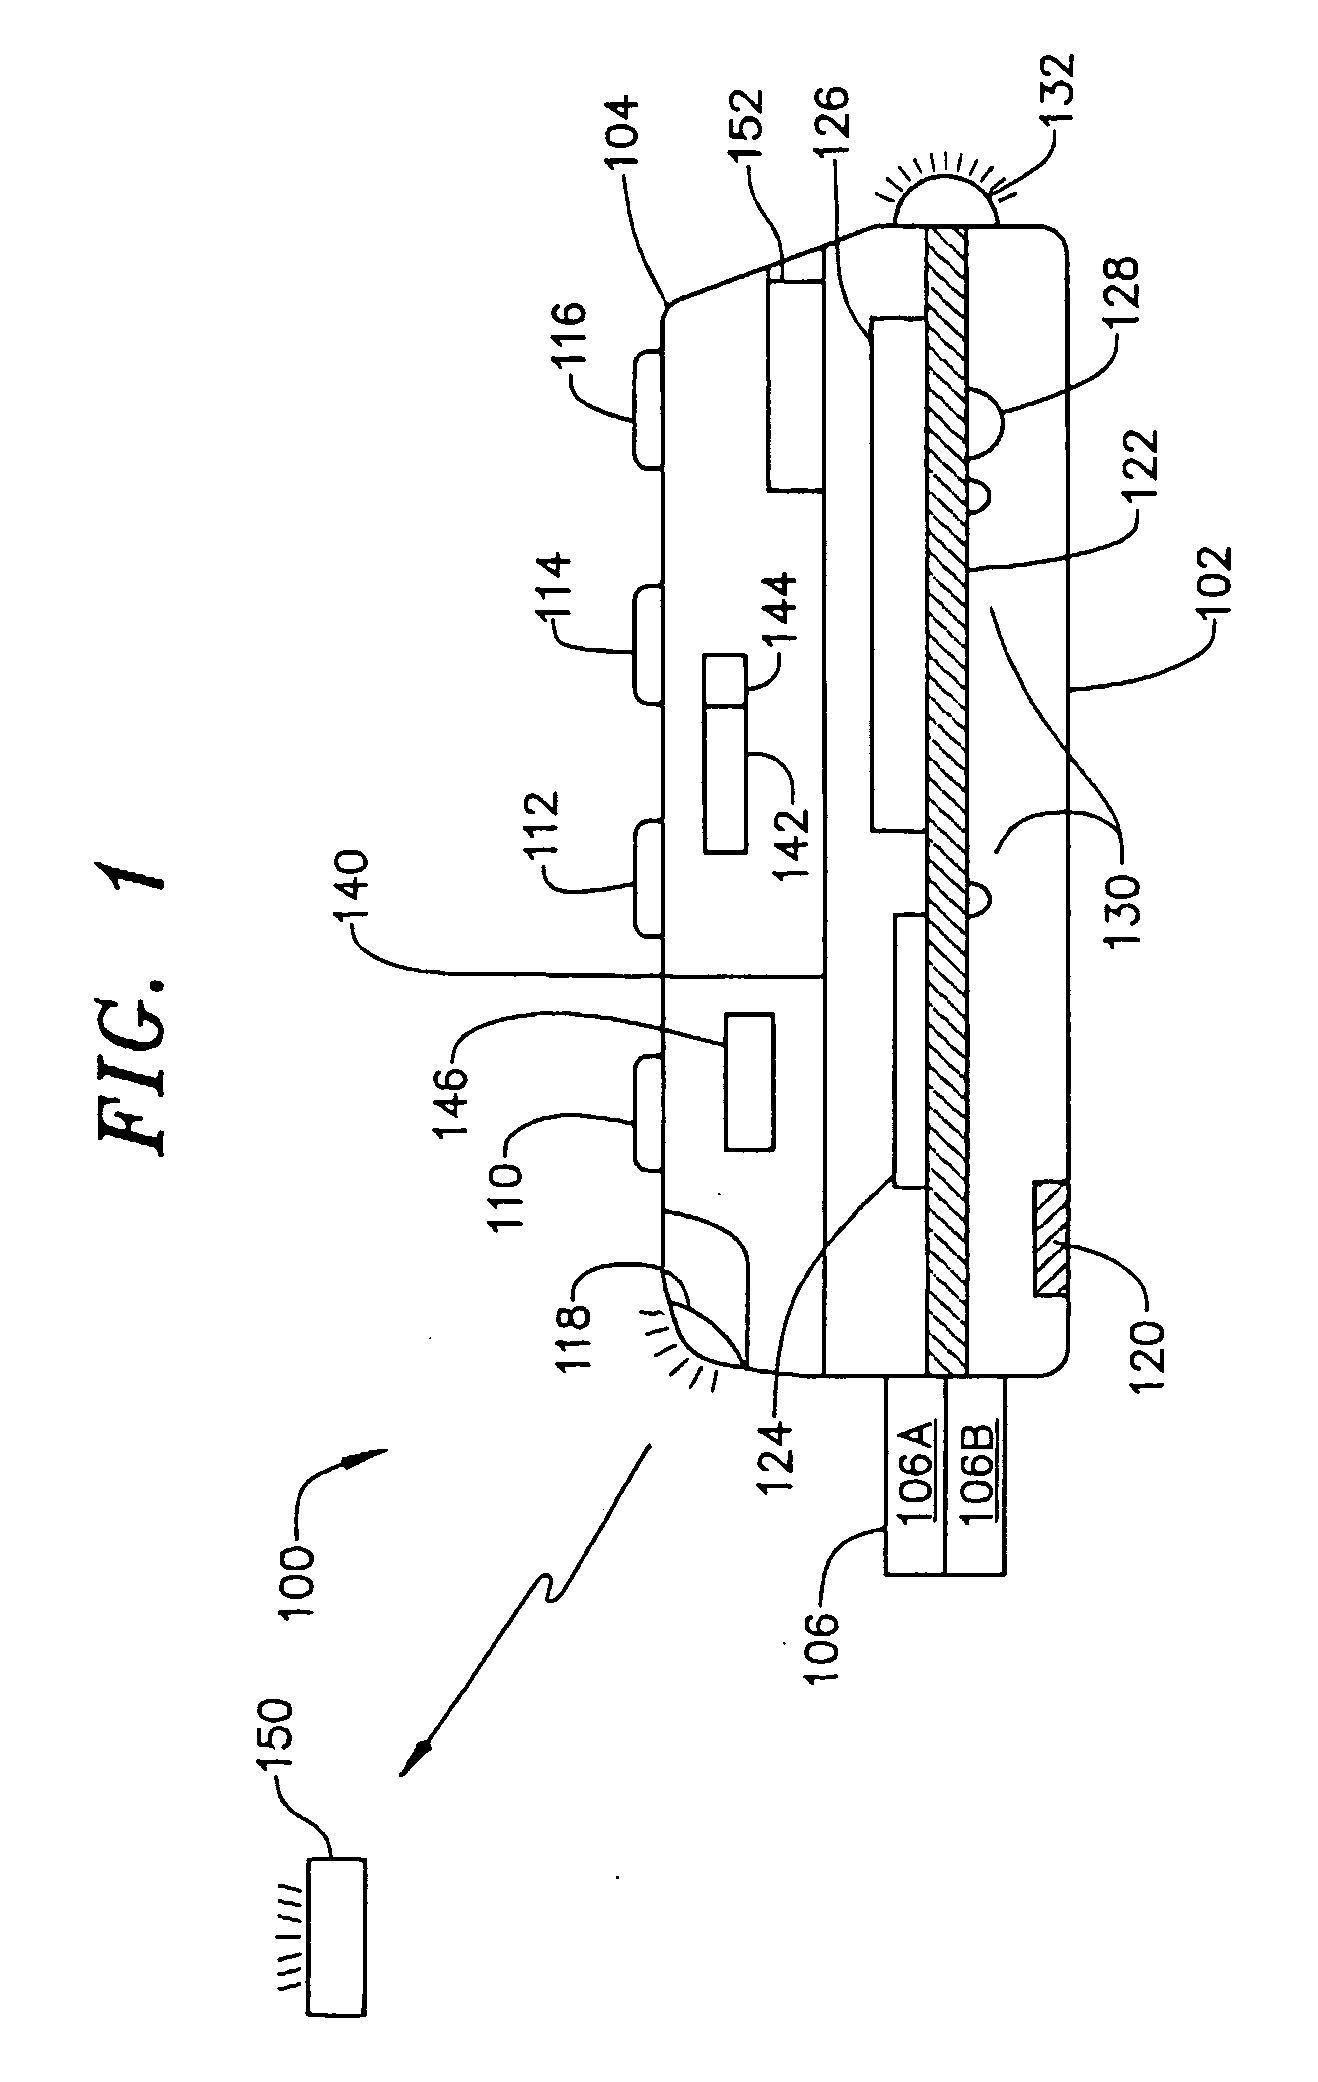 Remote Keyless Entry Device with Integrated Accessible Memory Storage